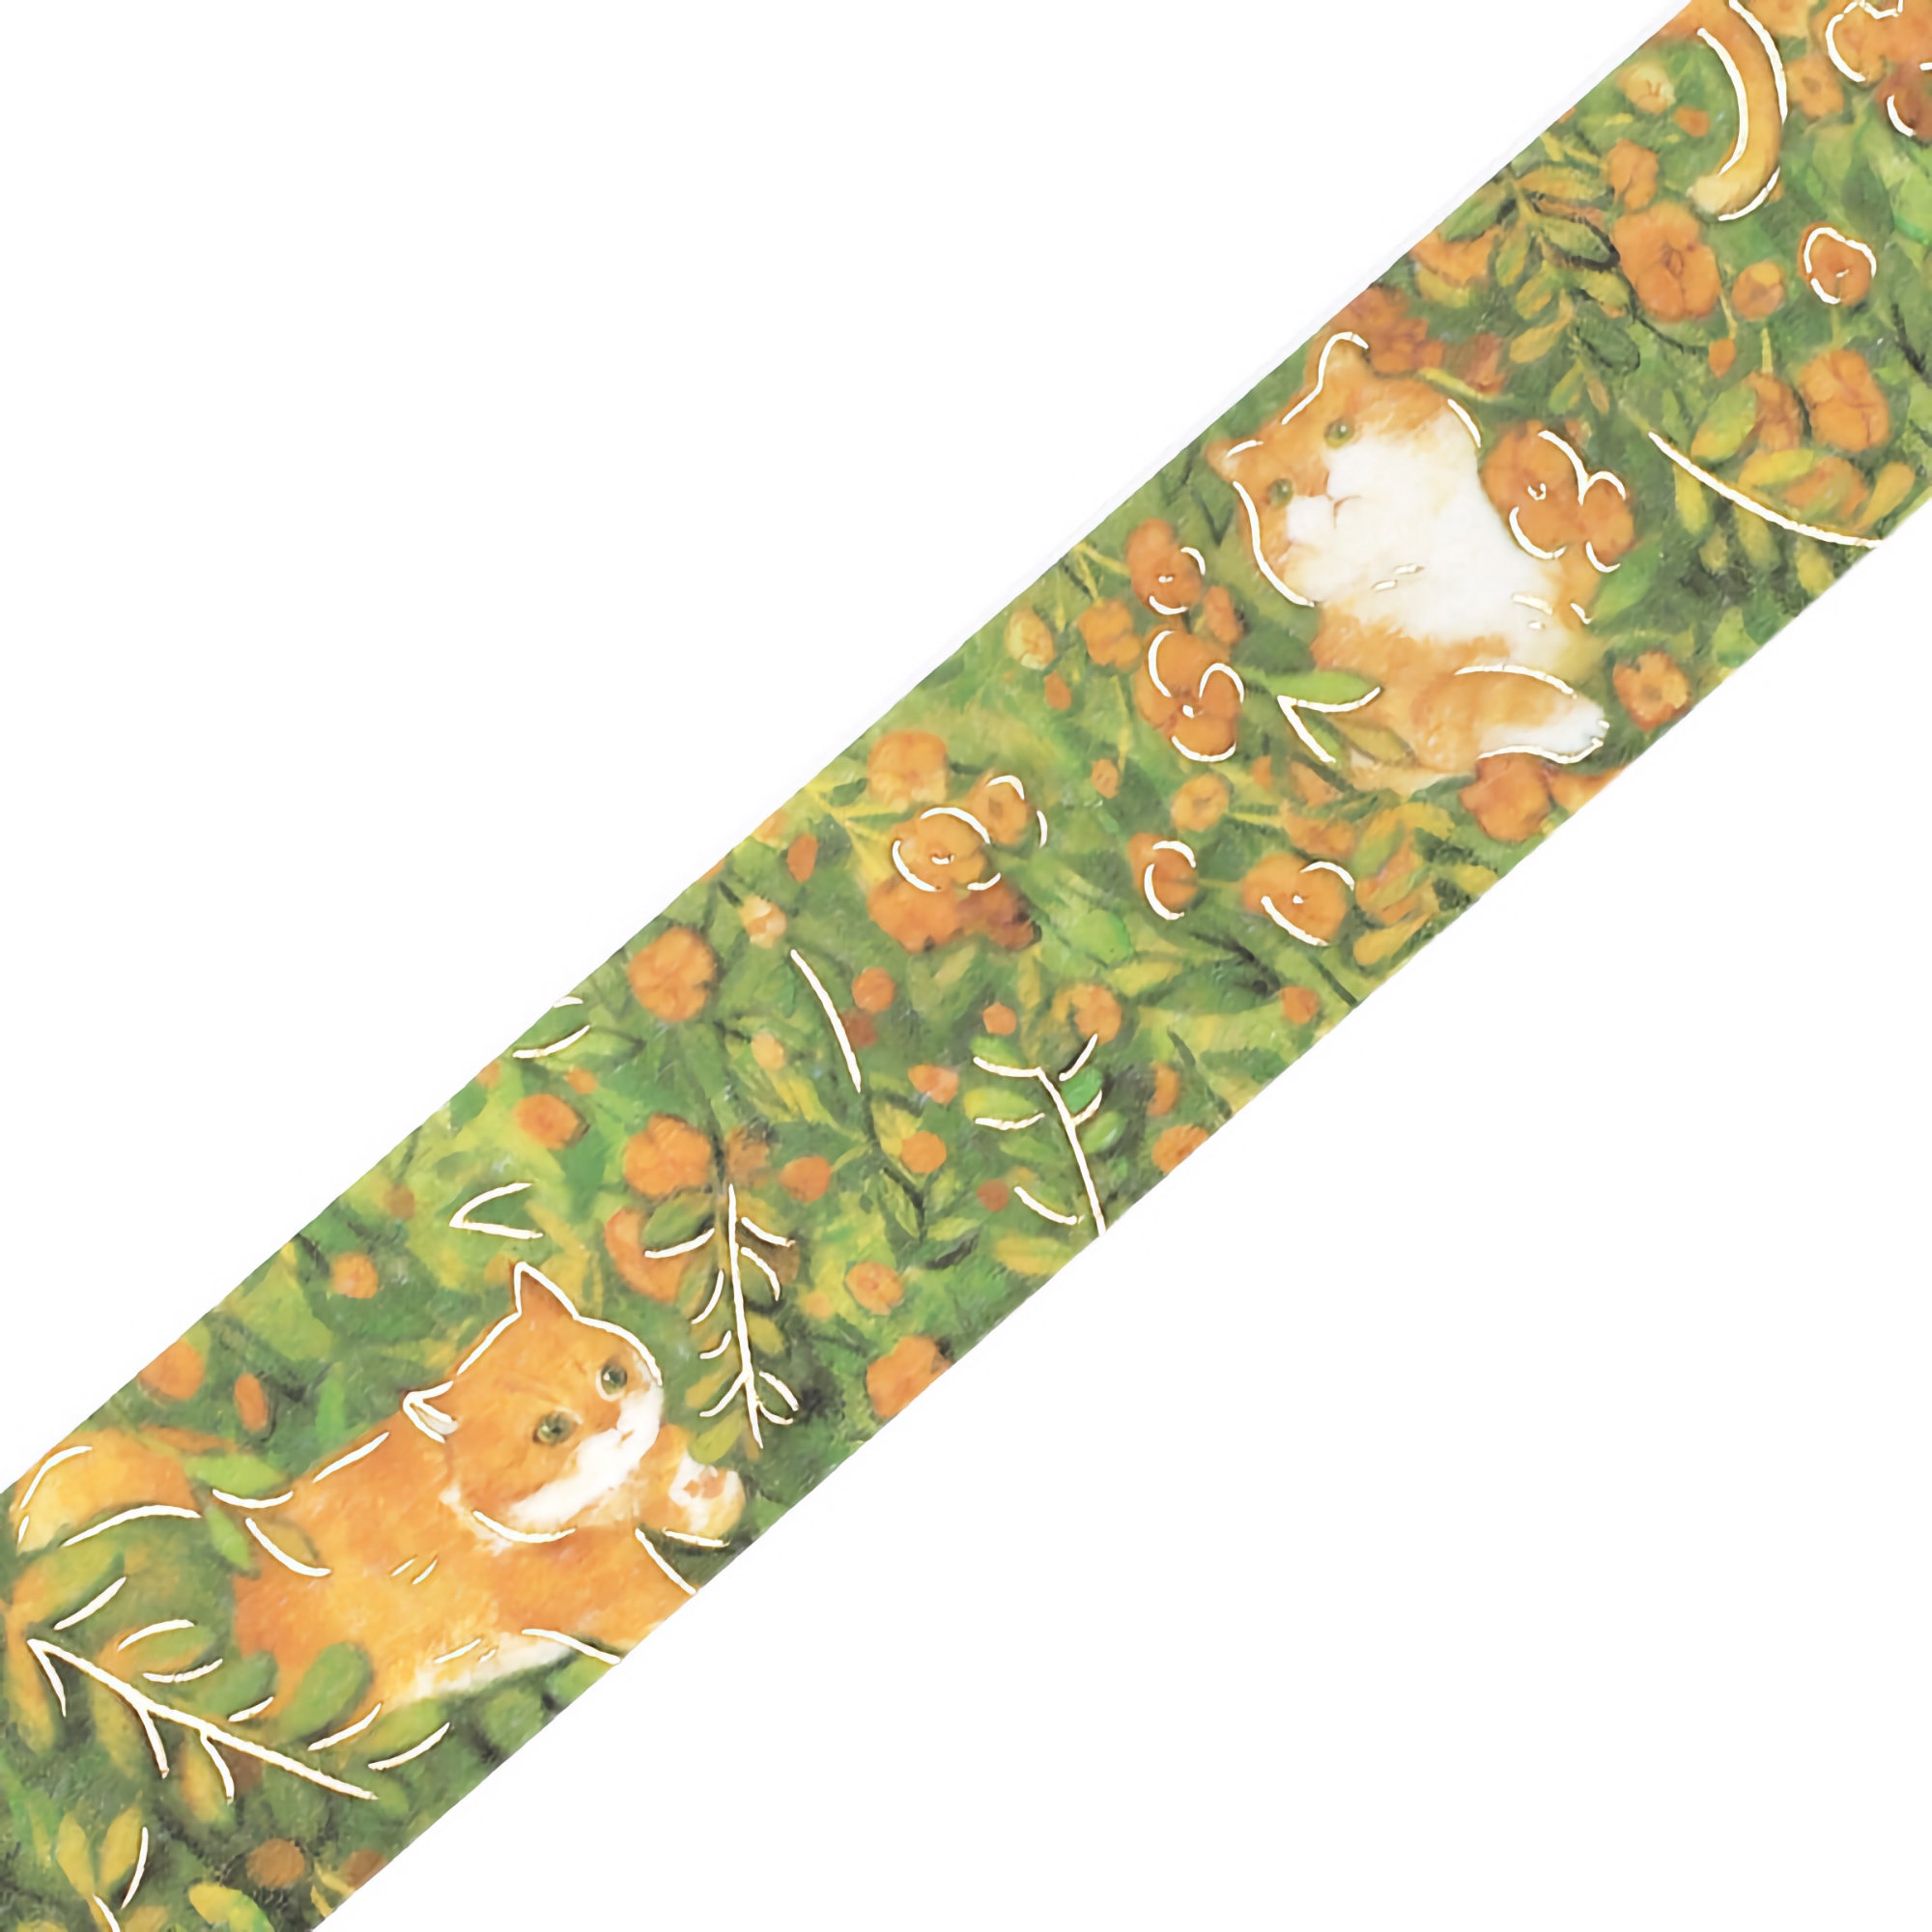 BGM Washi Tape Special Foil Flowers and Cats / Find Me 20 mm